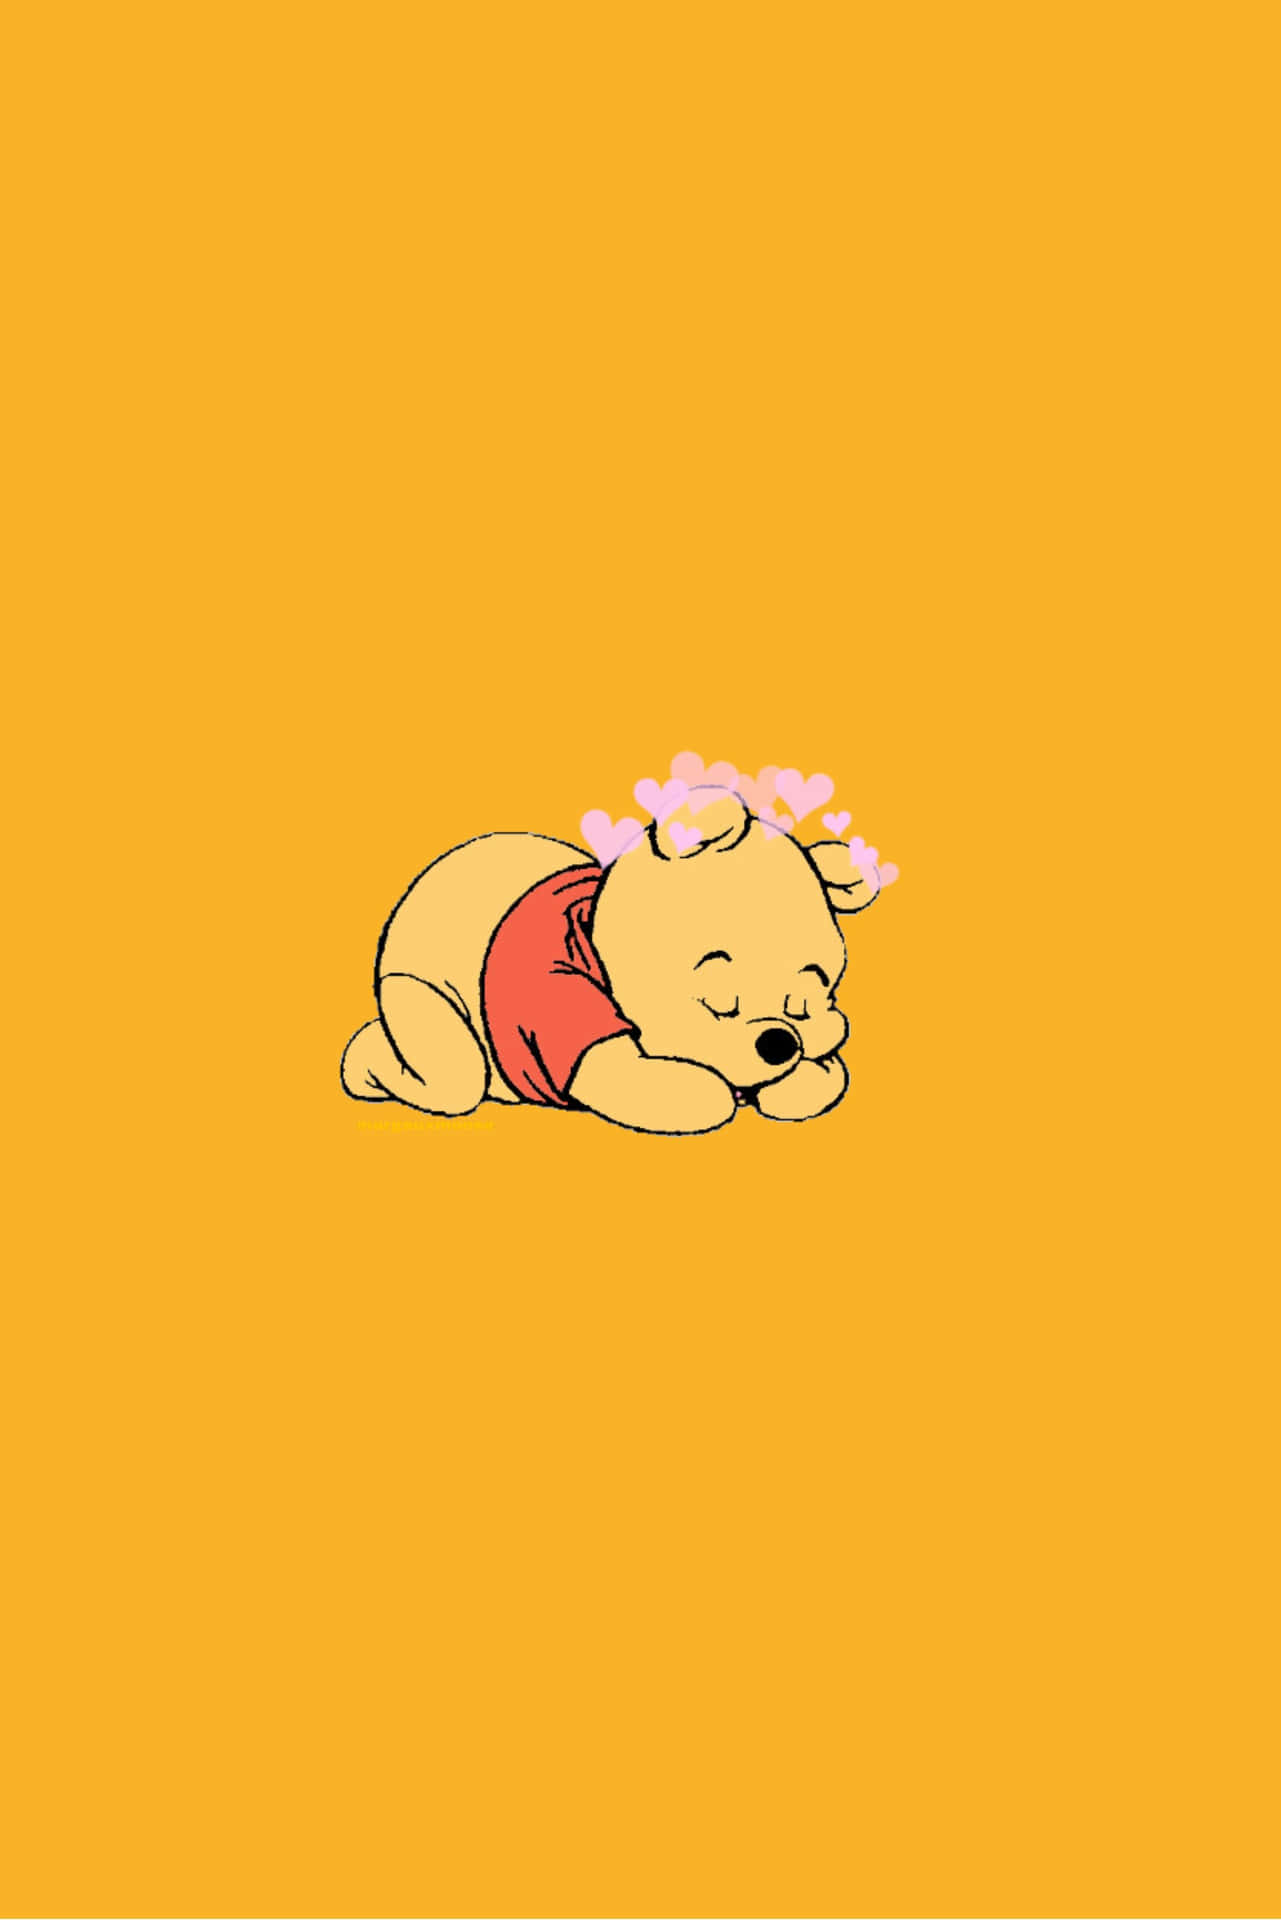 Download A Lovely Aesthetic With Winnie The Pooh Wallpaper | Wallpapers.com